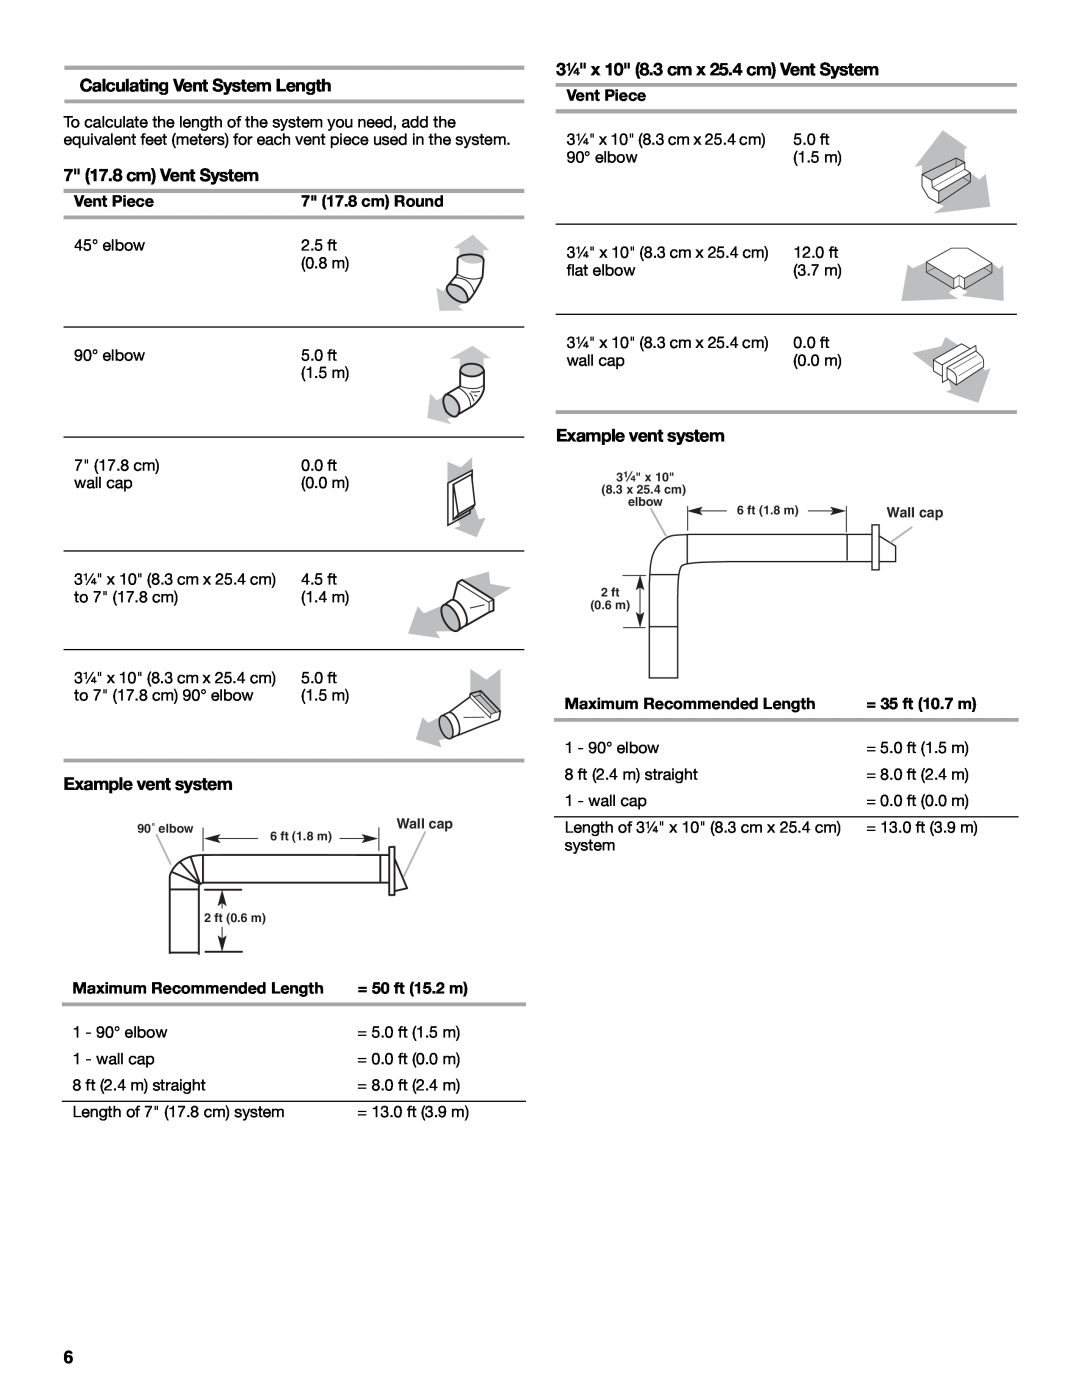 Whirlpool W10240580A Calculating Vent System Length, 7 17.8 cm Vent System, 3¹⁄₄ x 10 8.3 cm x 25.4 cm Vent System 